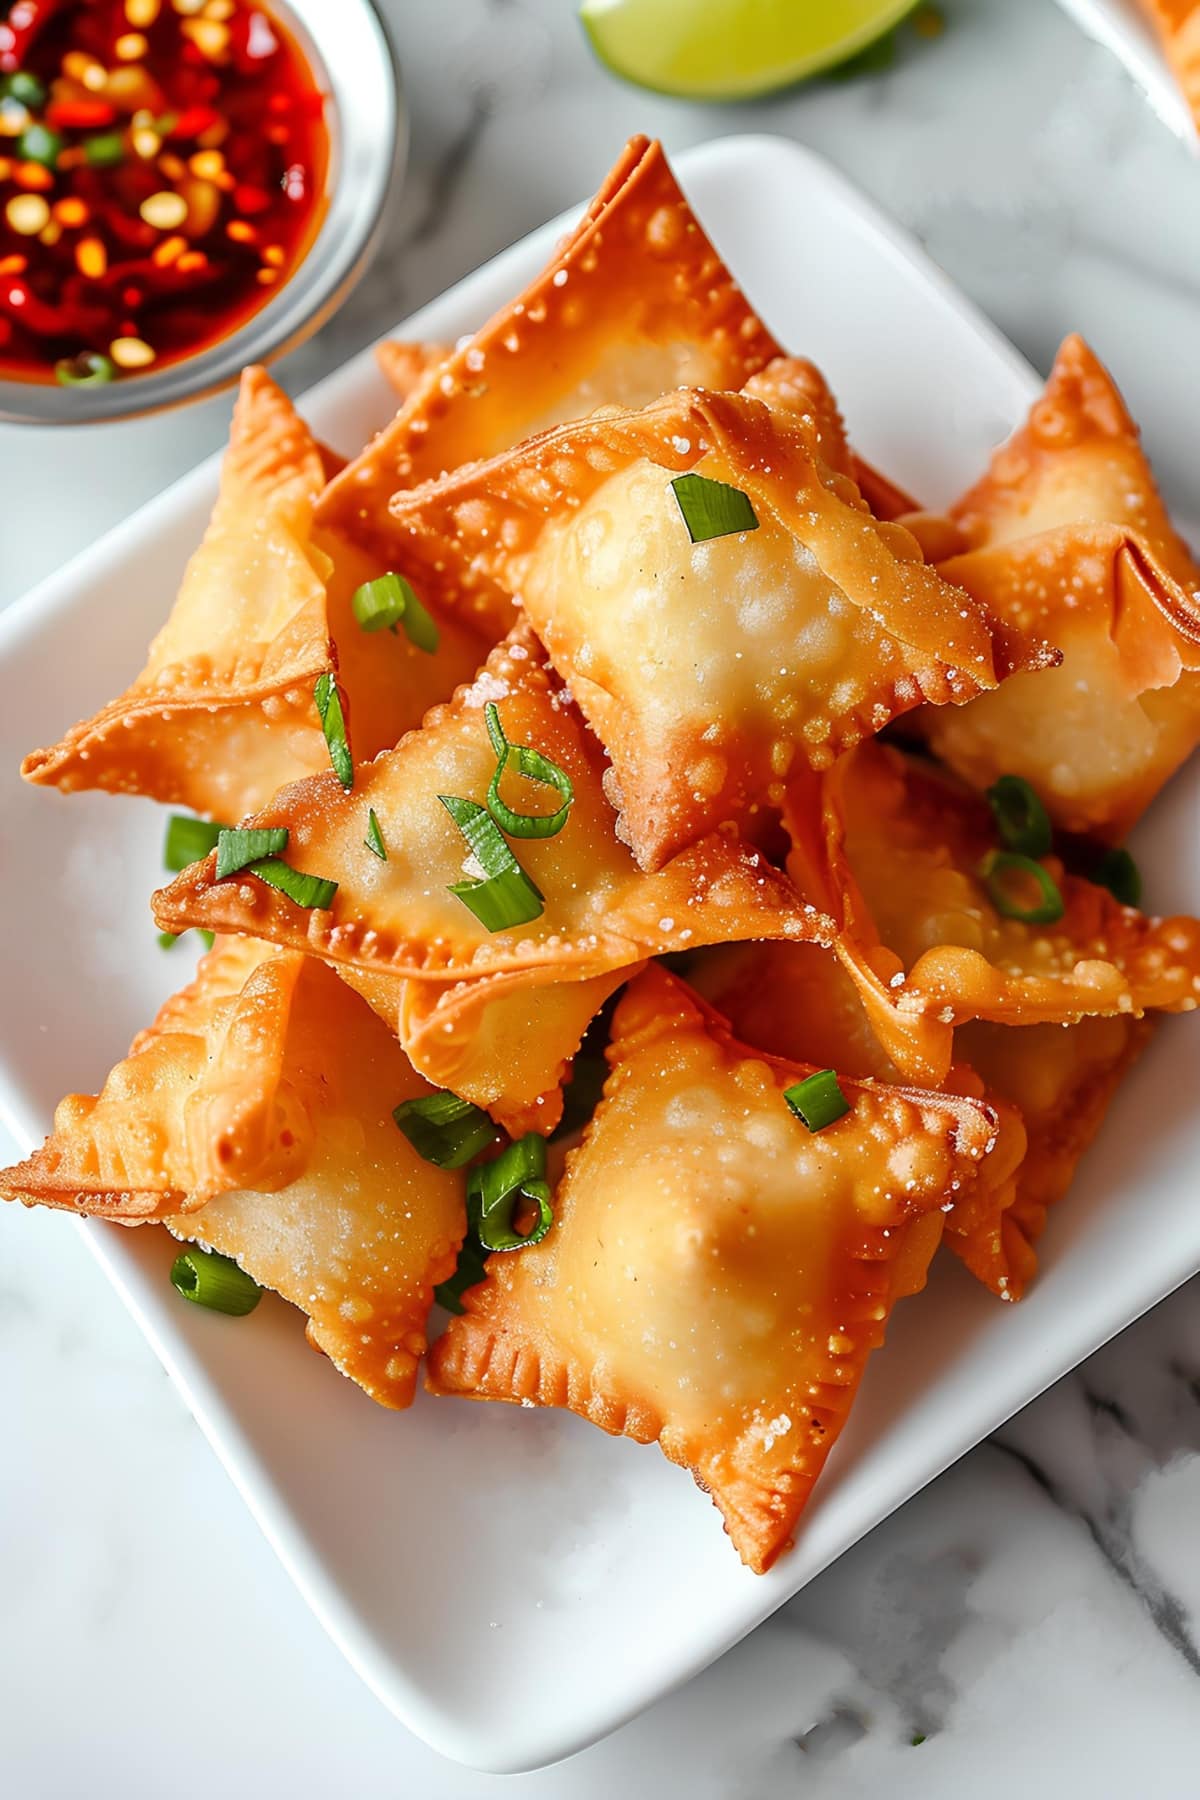 Crab rangoon with chili sauce topped with green onions